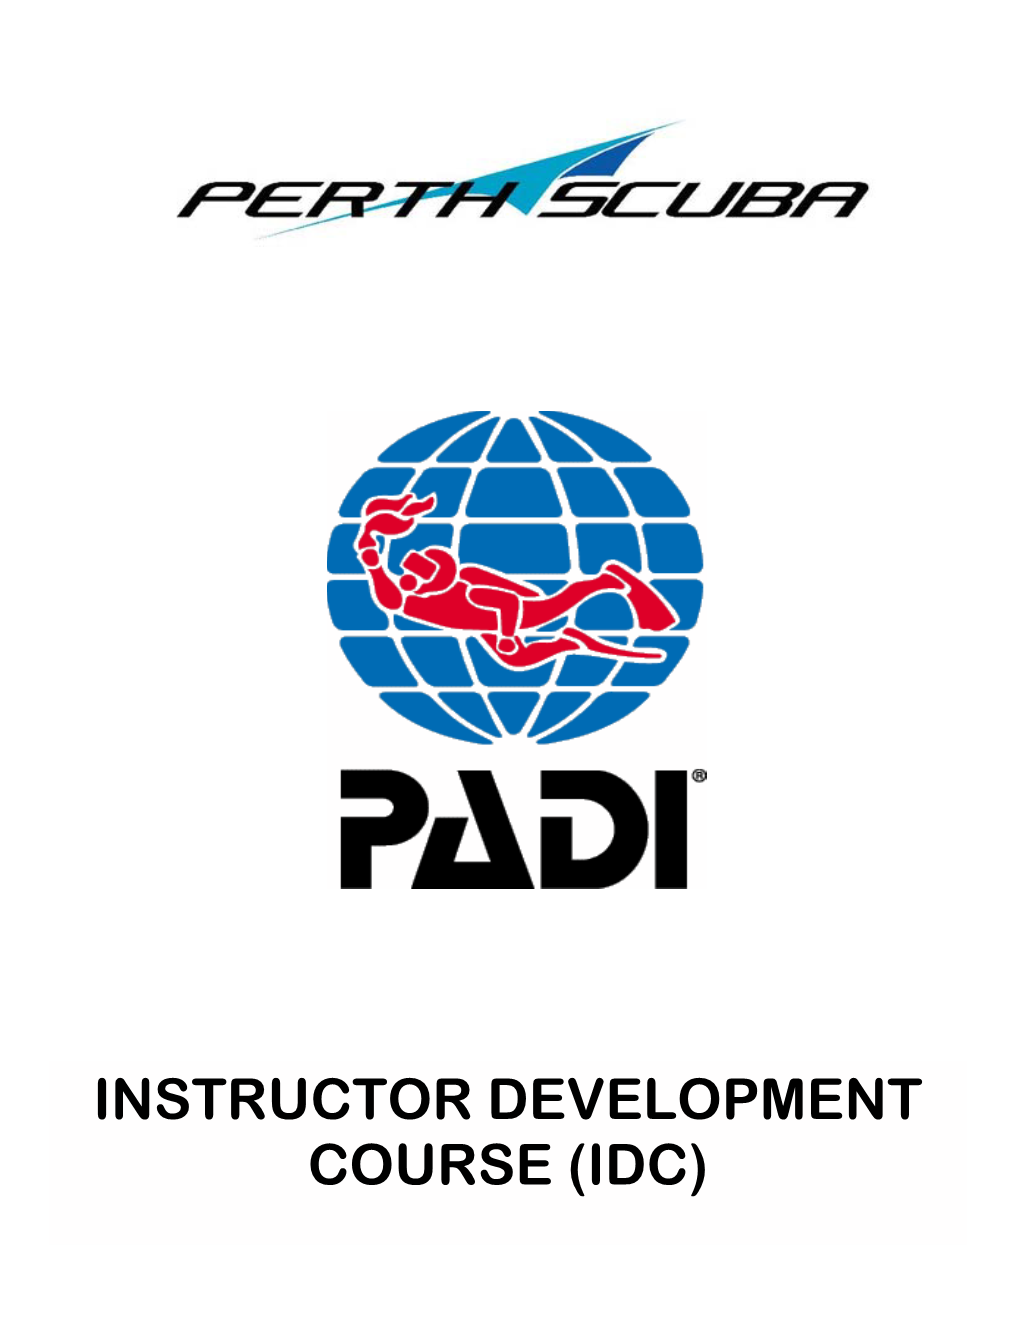 Instructor Development Course (IDC) Is the Gateway to Becoming a Professional PADI Diving Instructor